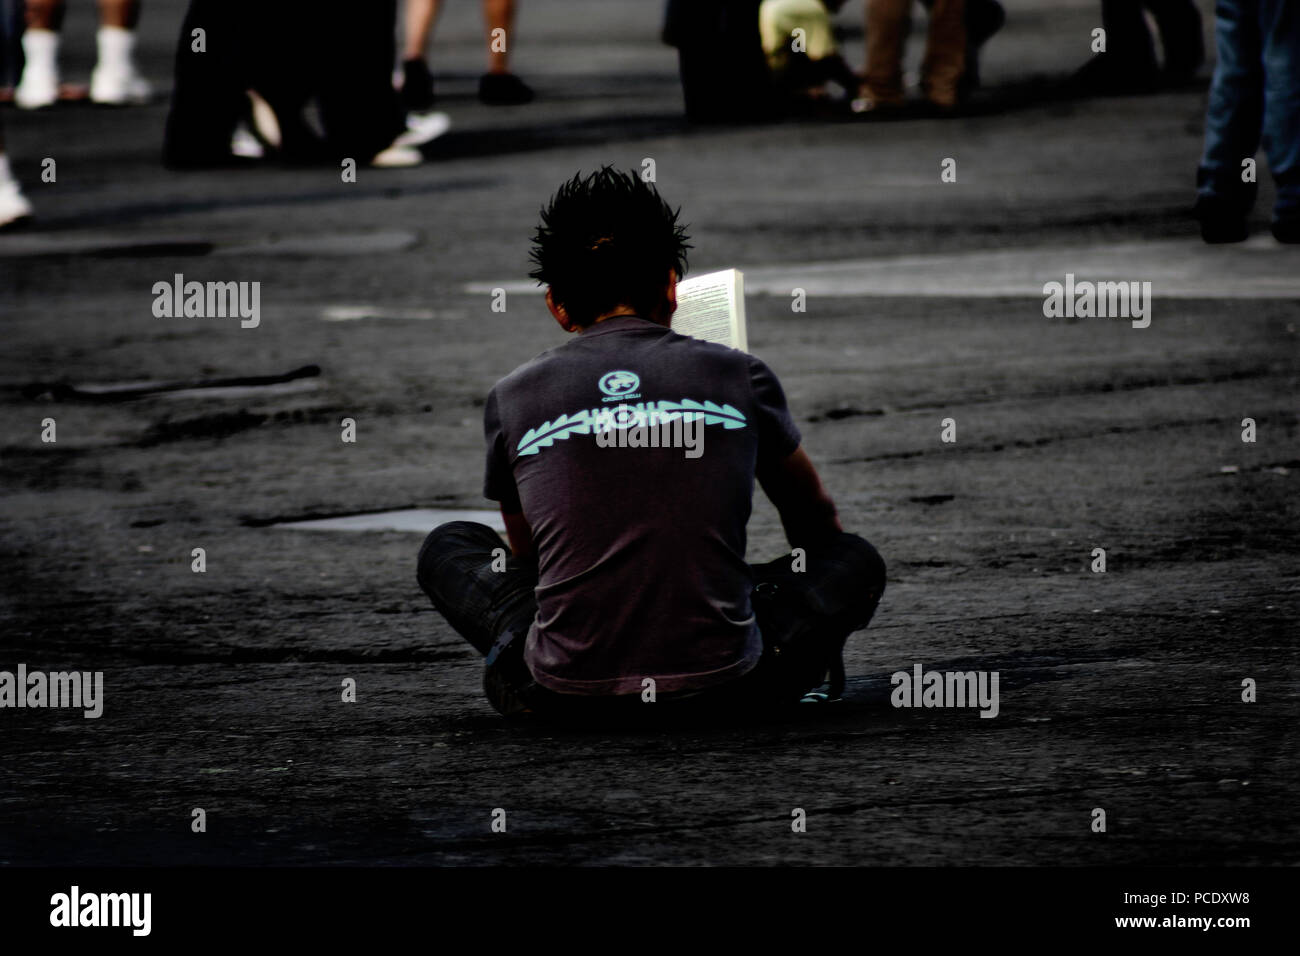 A boy sitting in the middle of the Mexico square reading while people walked around him. Stock Photo